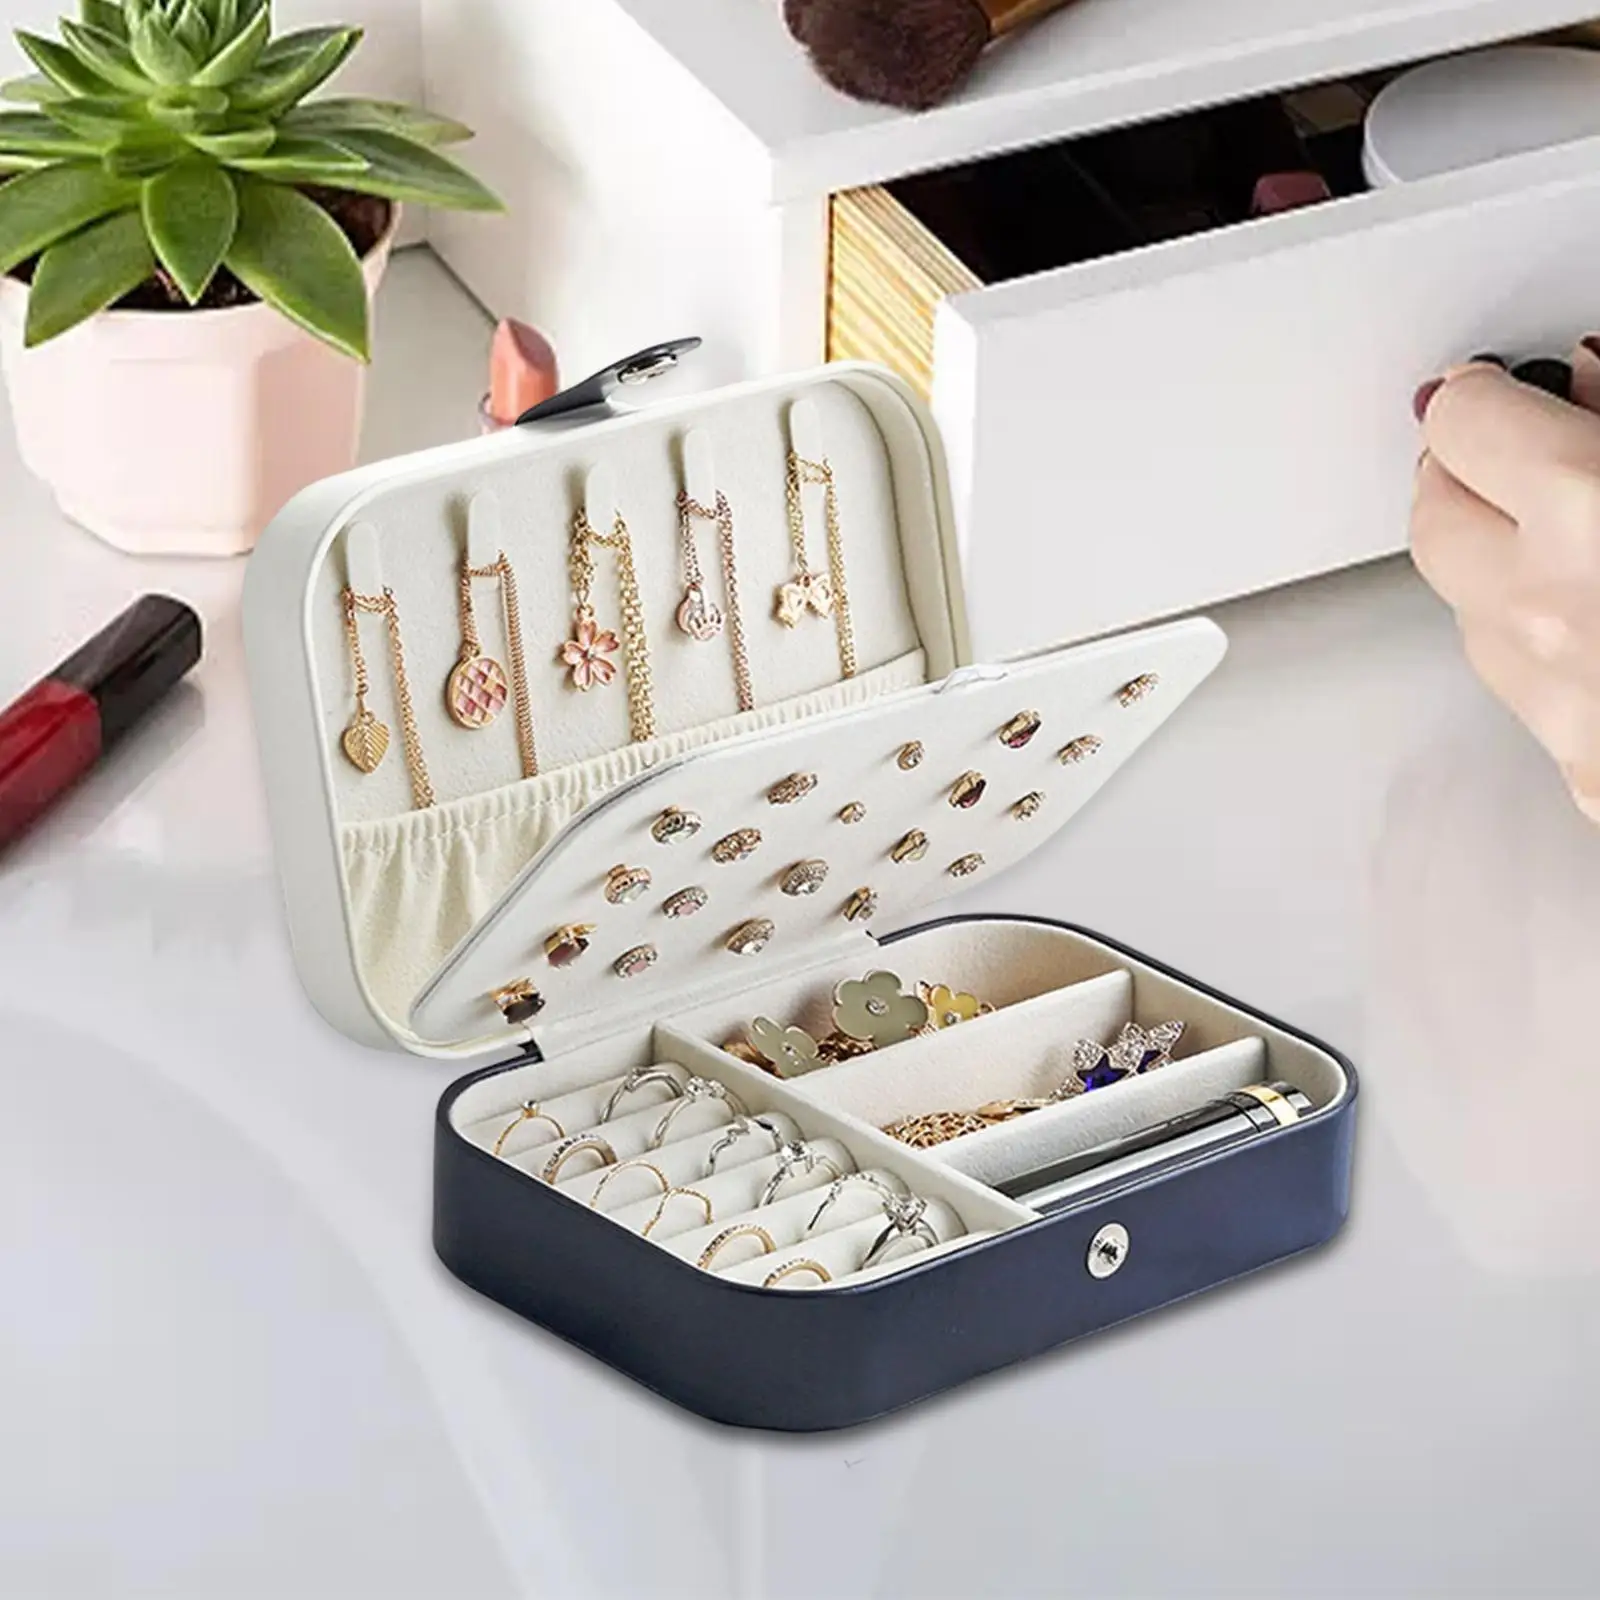 Small Jewelry Box Organizer 2 Layer PU Leather Travel Holder Storage Case for Ear Studs Watches Necklaces Girls Girlfriend